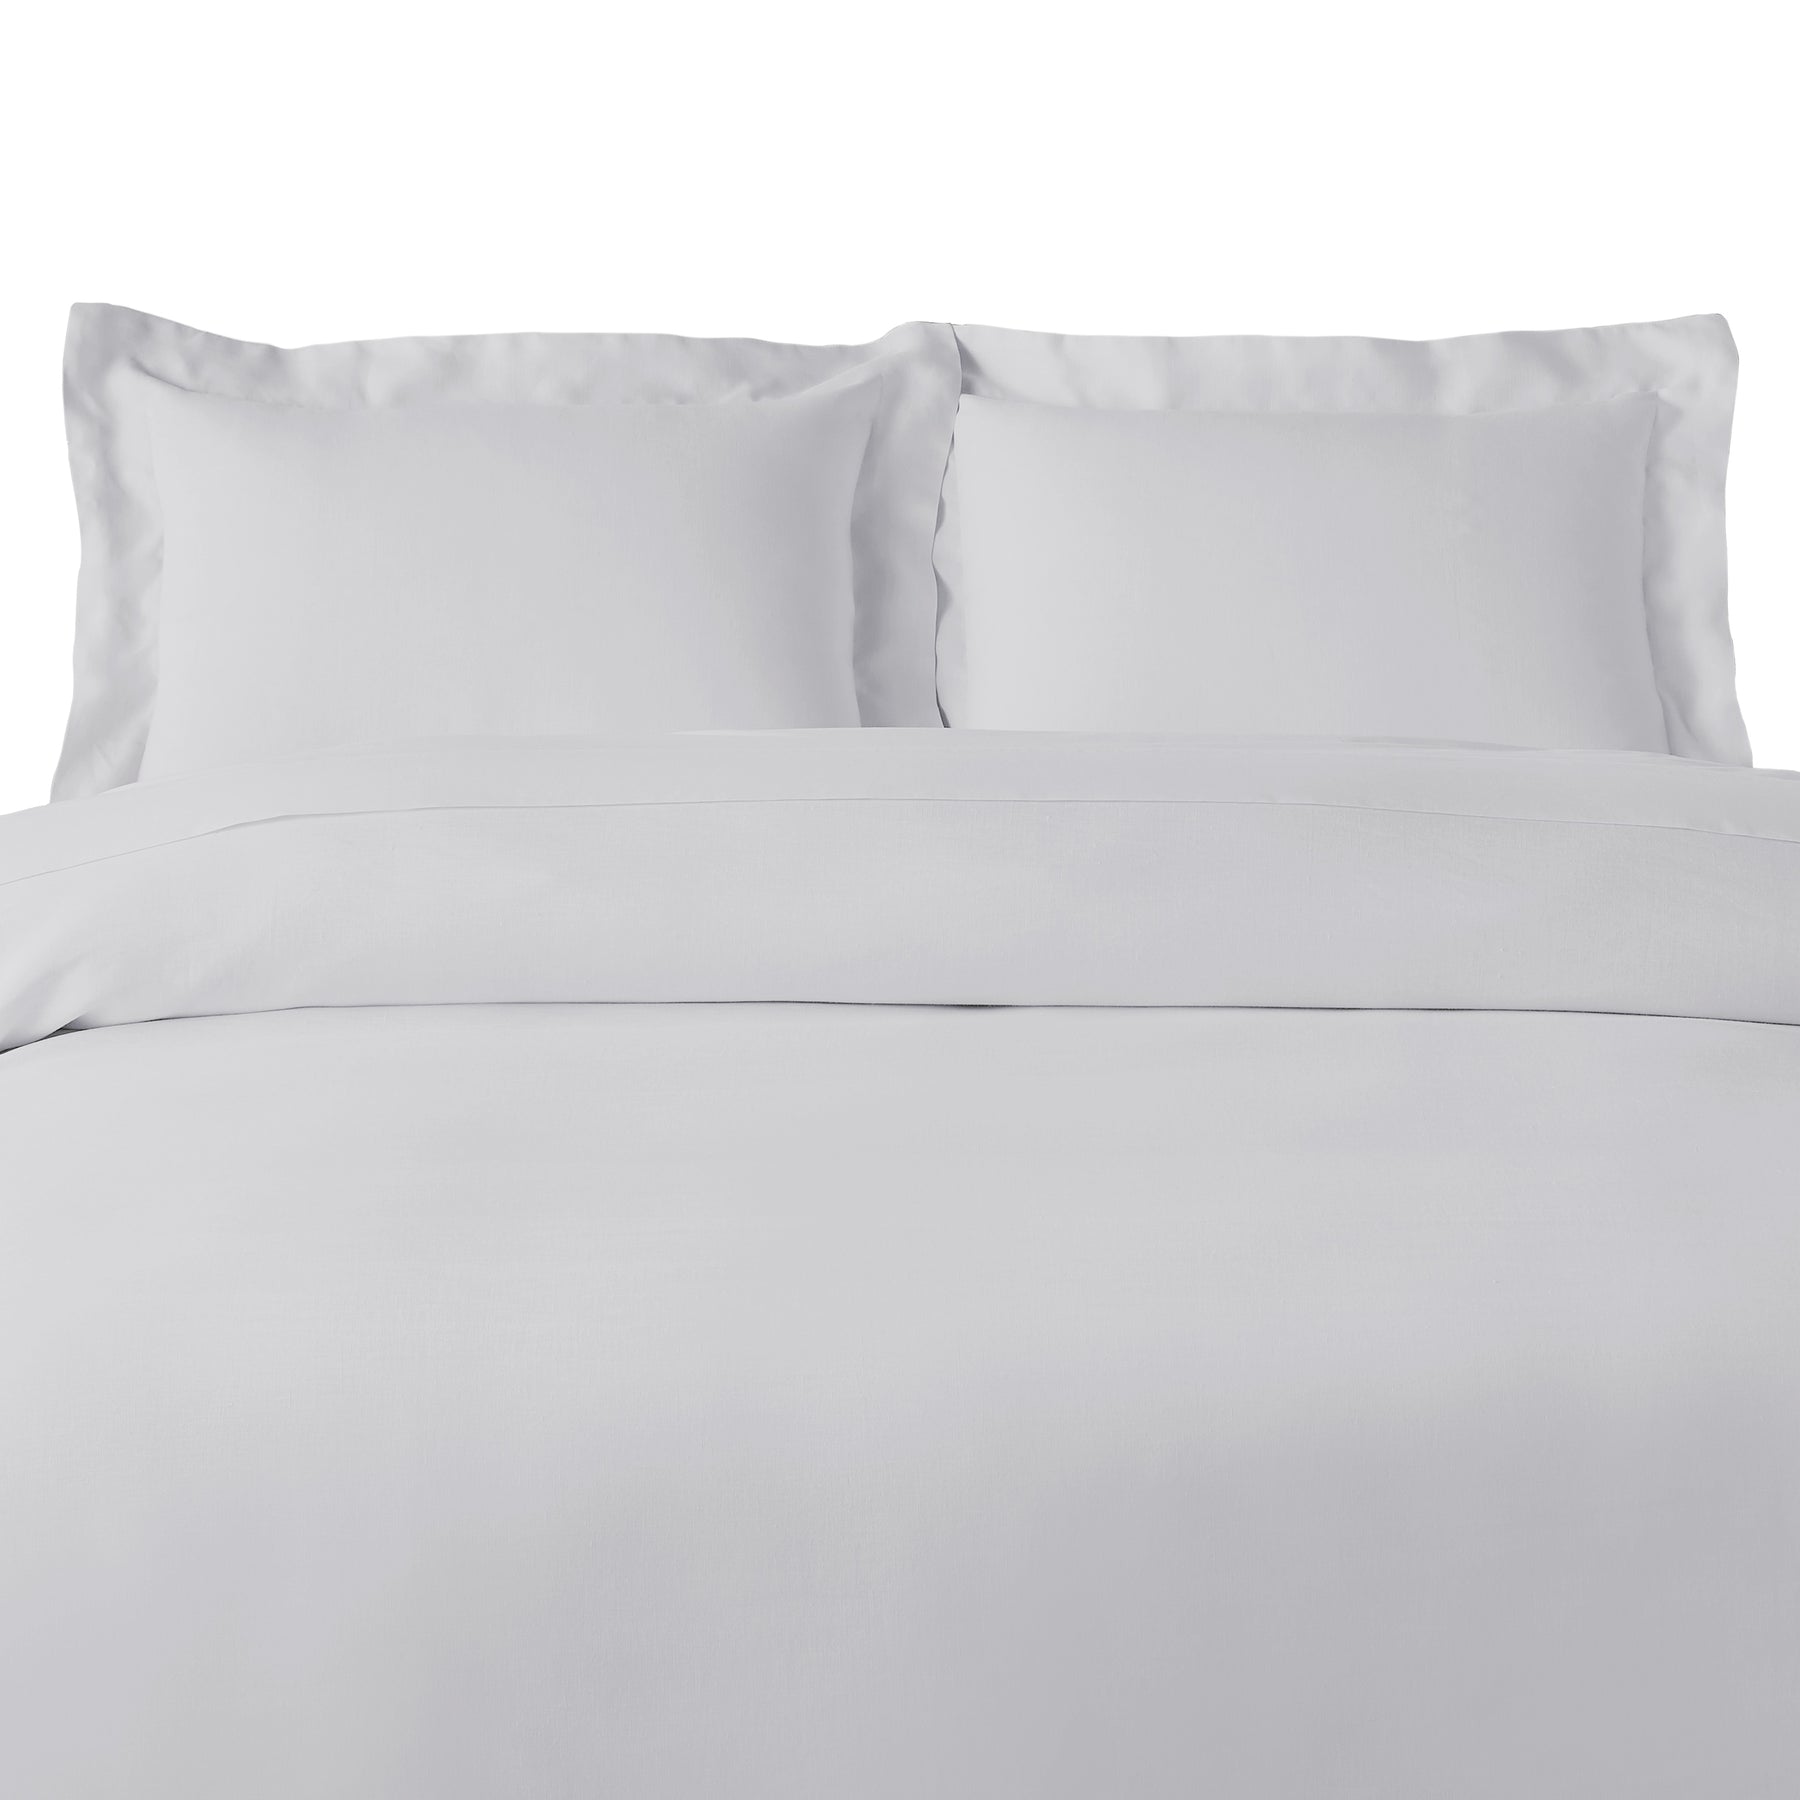 100% Rayon From Bamboo 300 Thread Count Solid Duvet Cover Set - Platinum